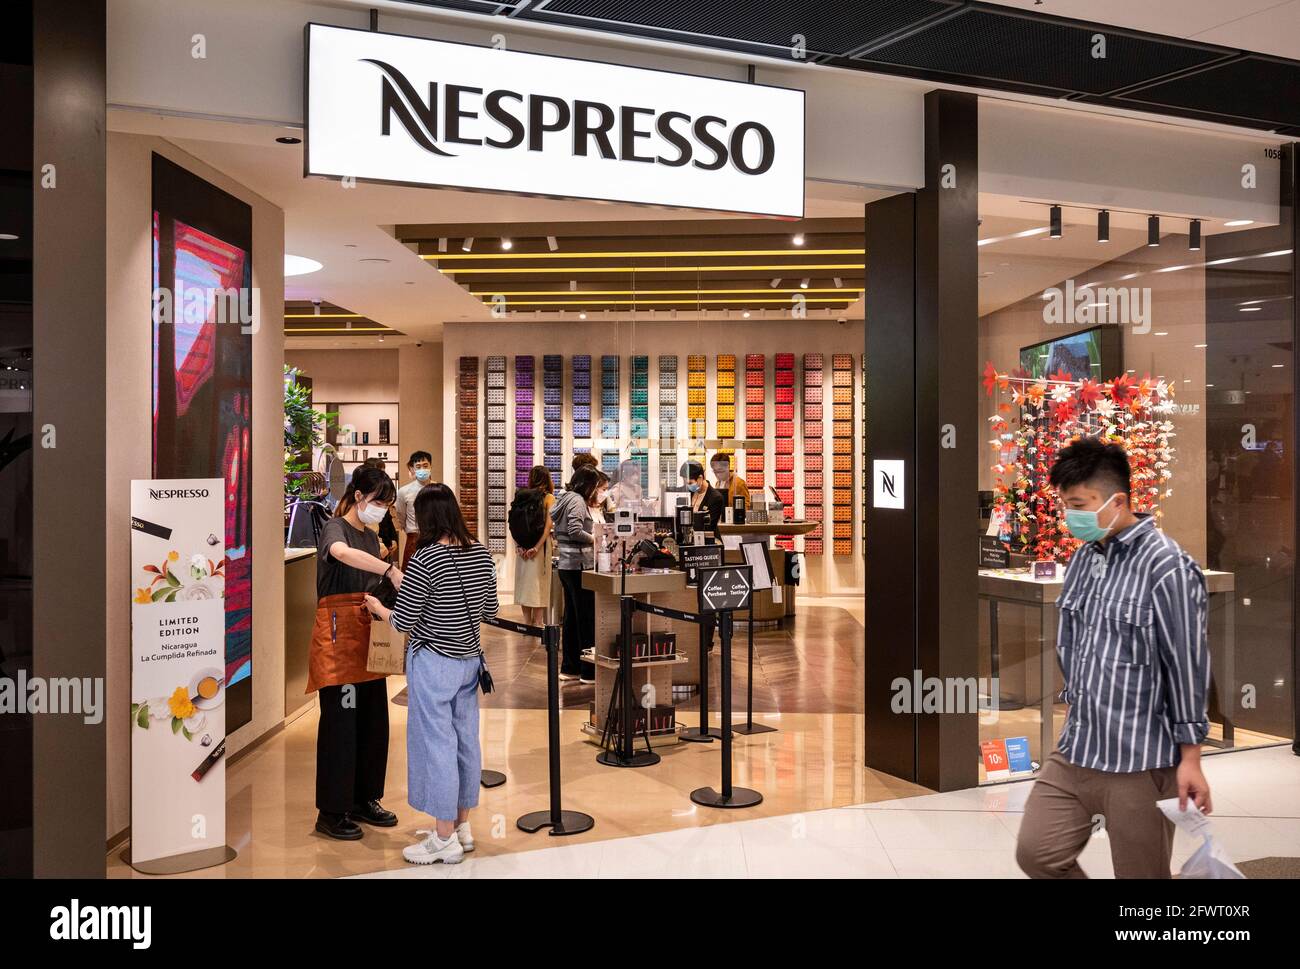 Page 16 - Nespresso High Resolution Stock Photography and Images - Alamy